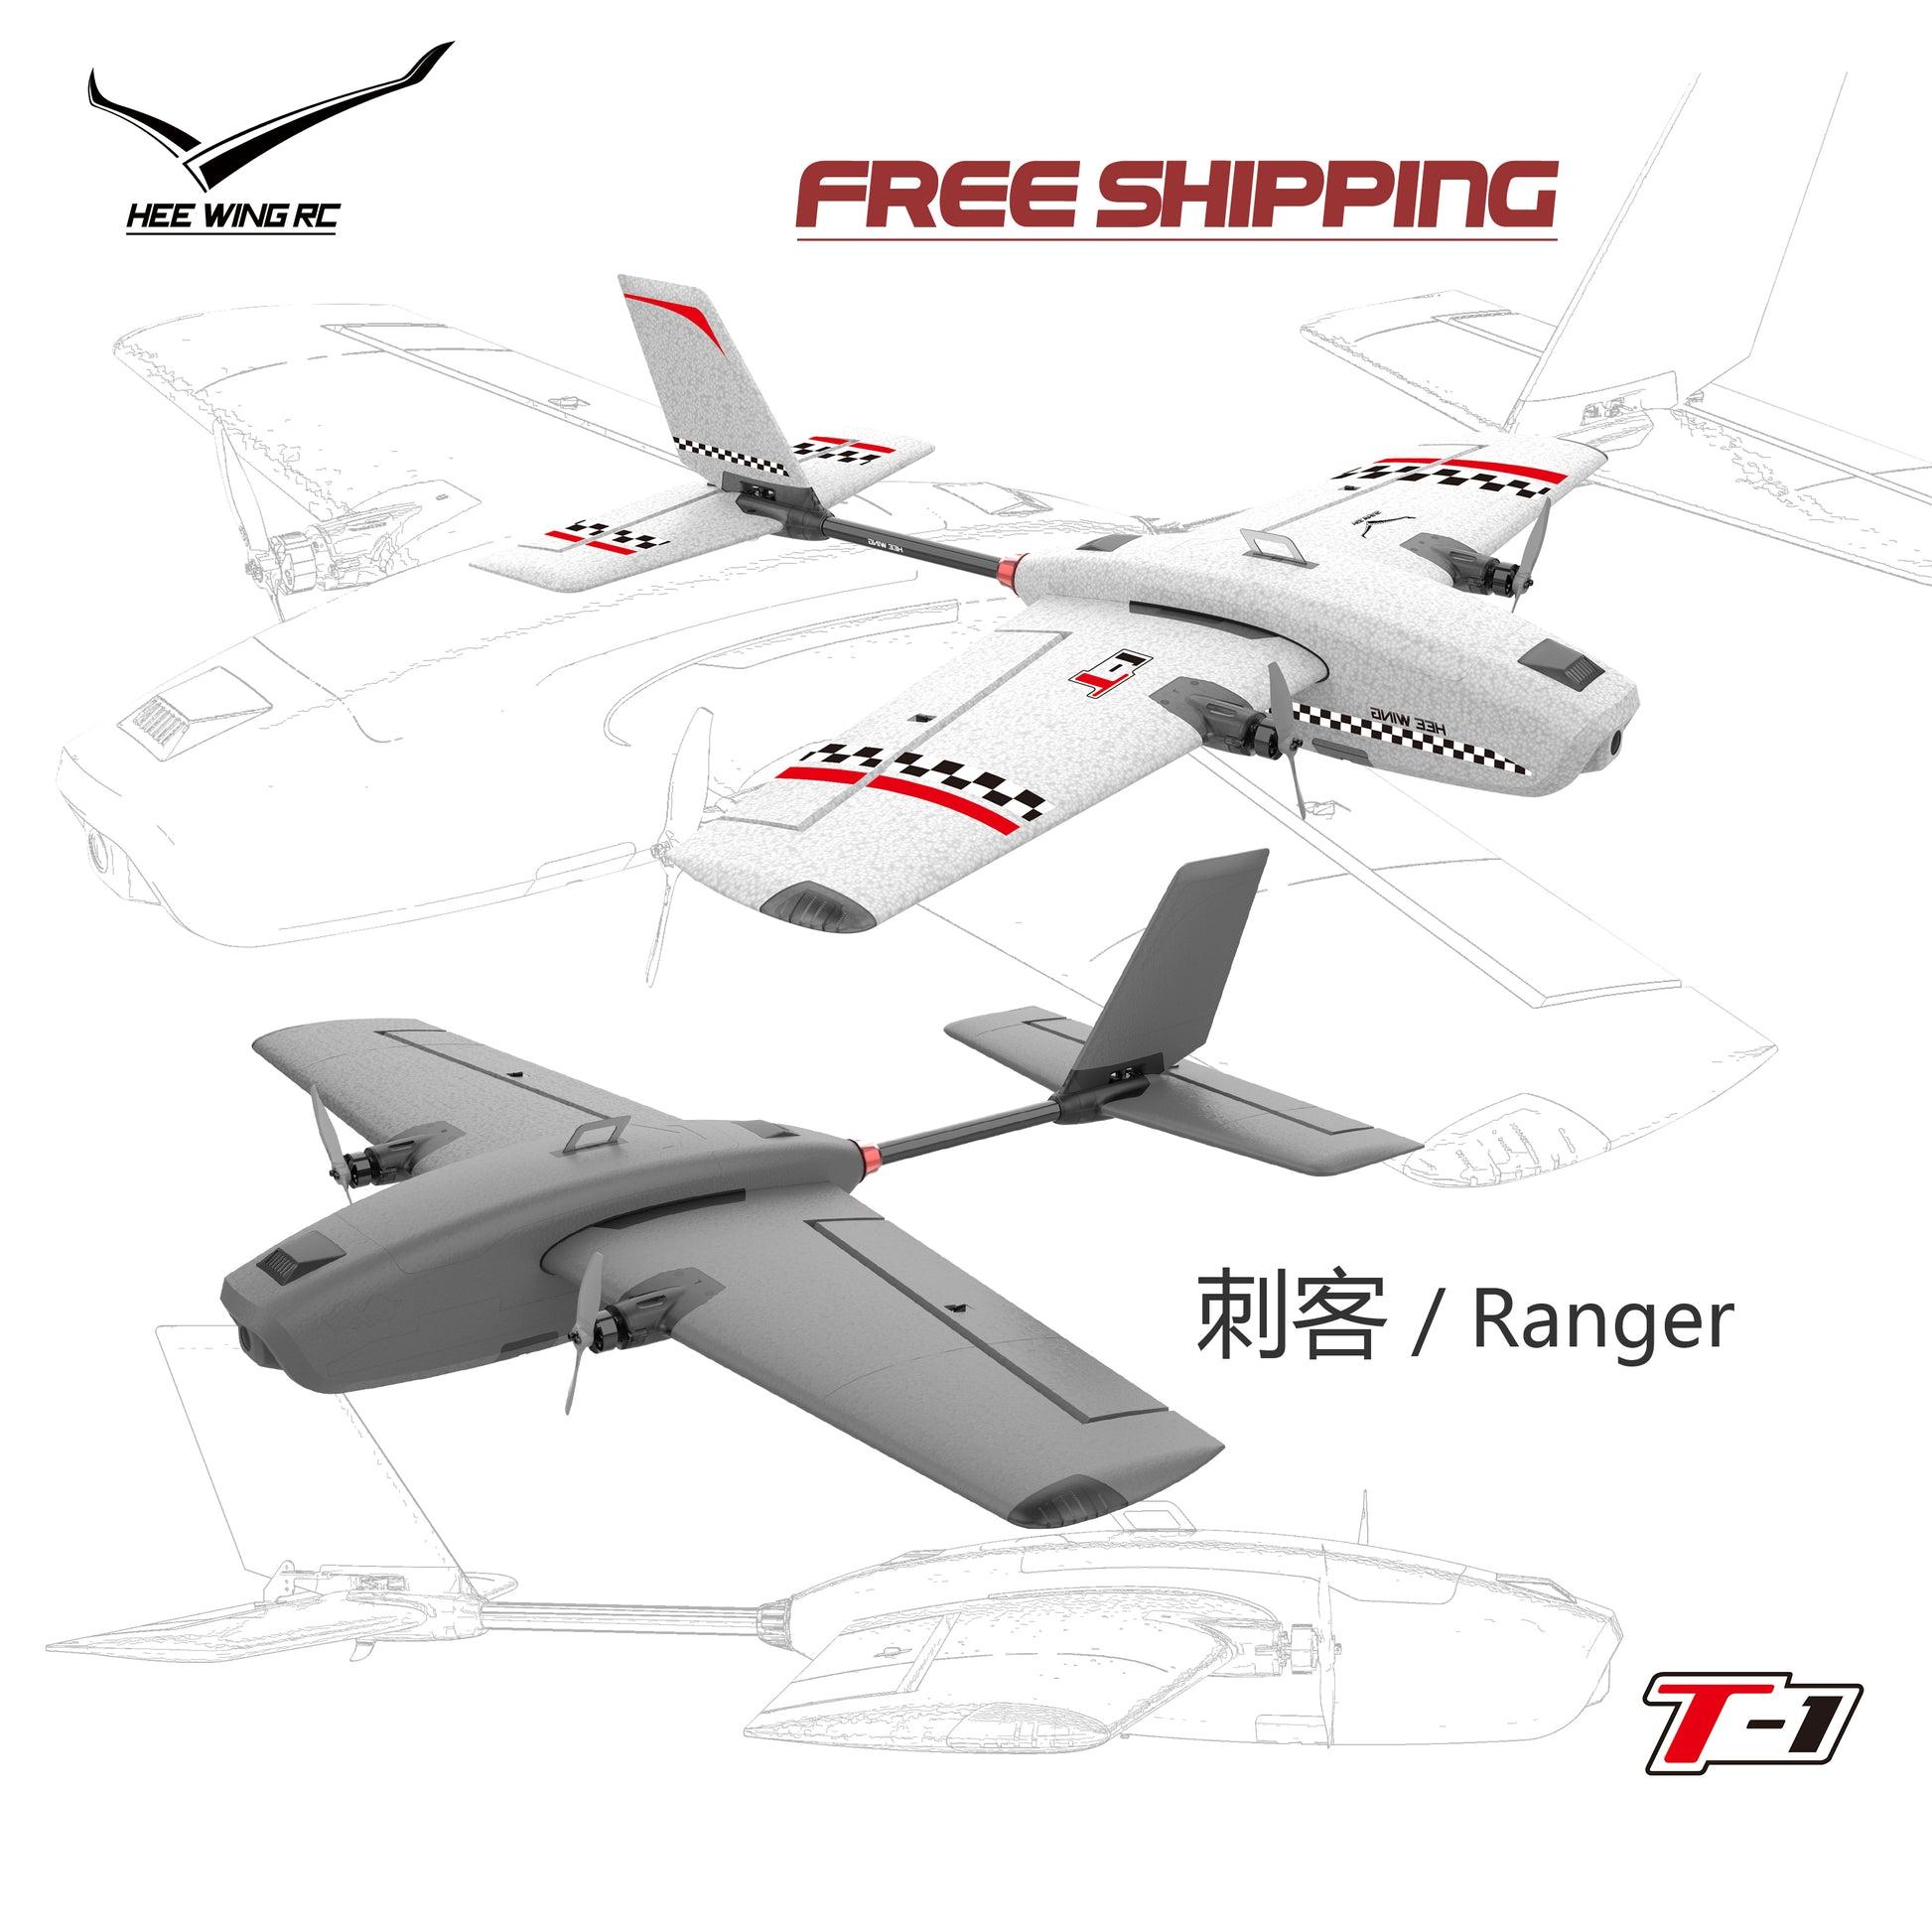 Heewing T1 Ranger: Exploring uncharted territories made easy: Specifications of the heewing t1 ranger revealed